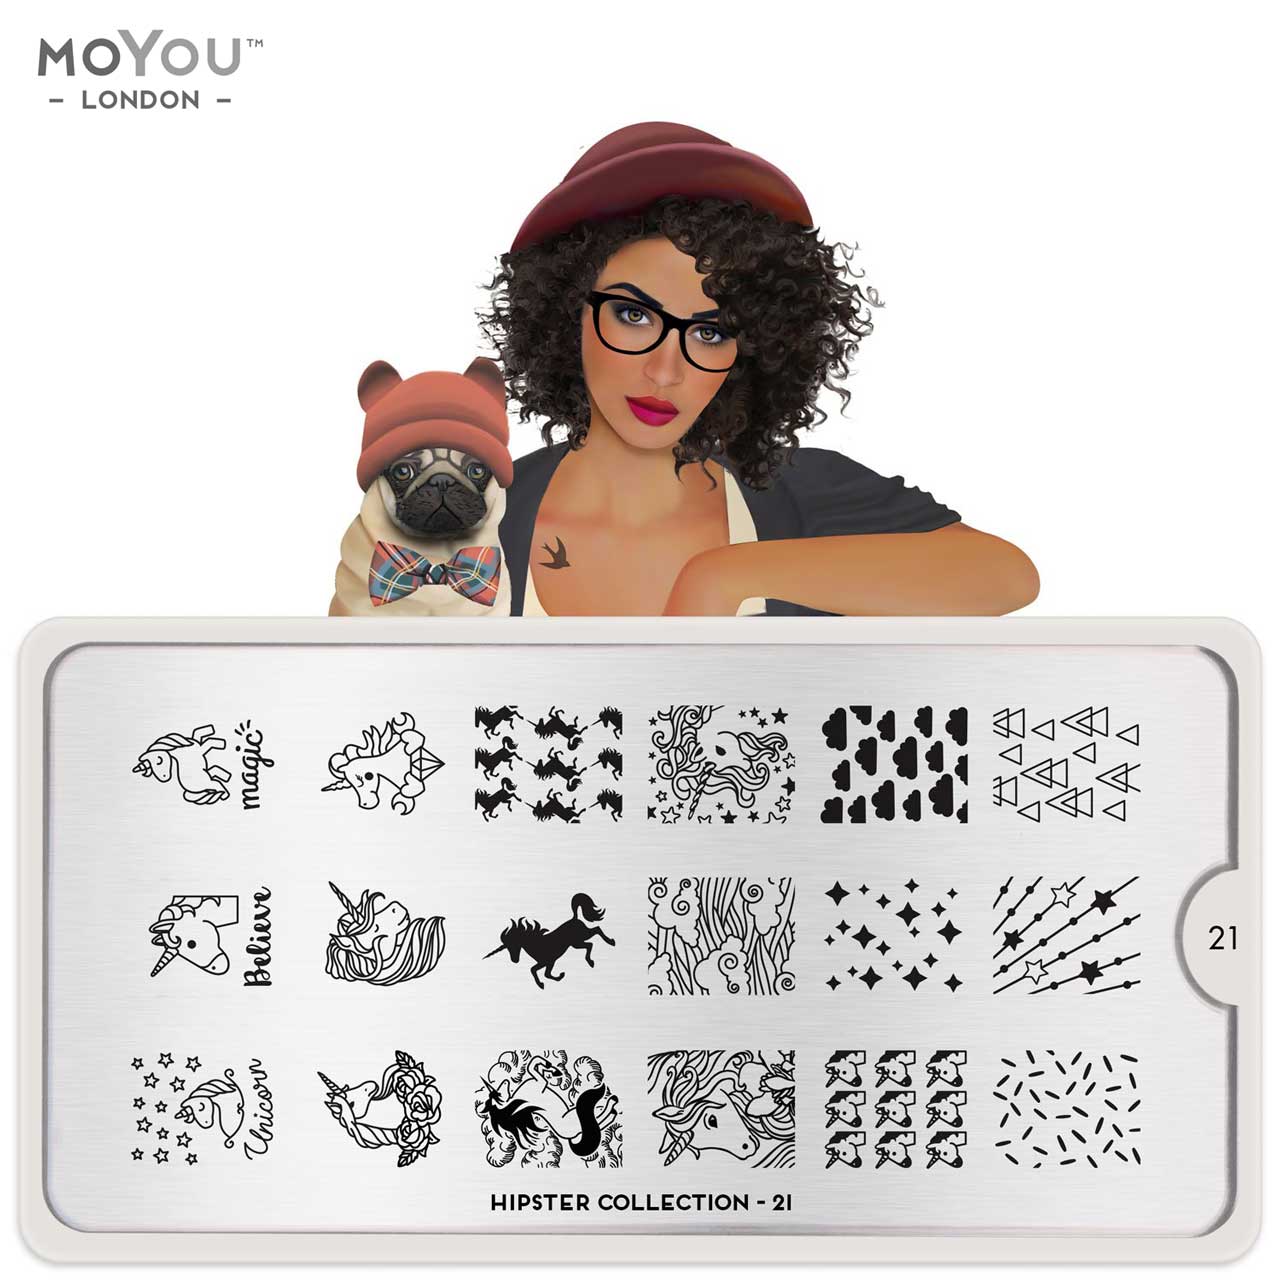 Plaque Stamping Hipster 21 - MoYou London